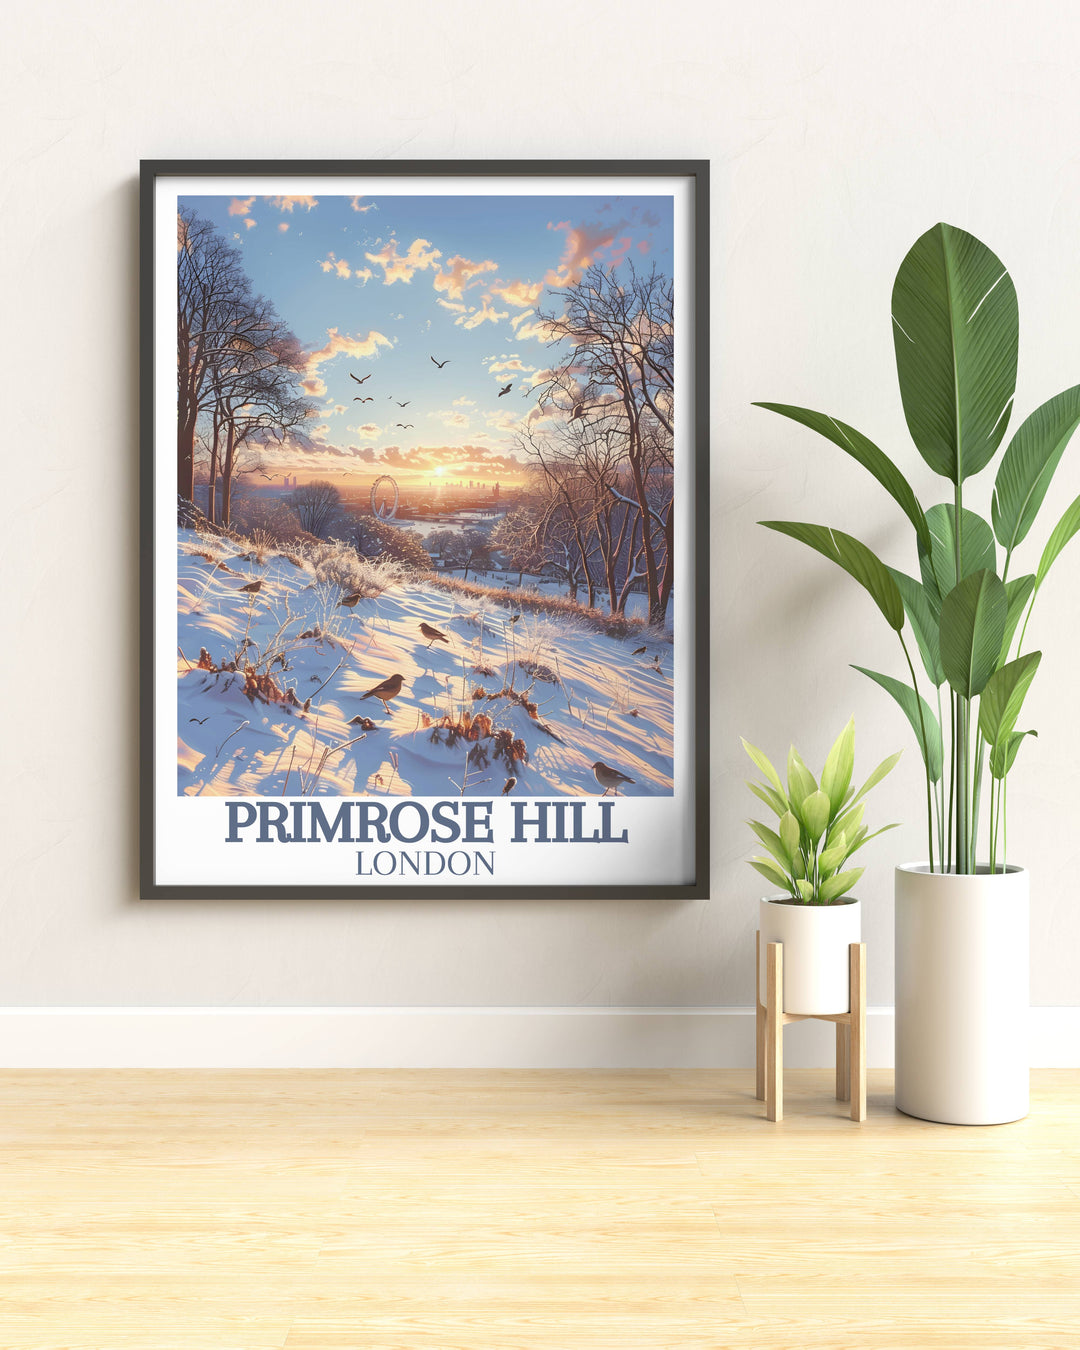 Celebrate Londons heritage with our Vintage Posters, highlighting iconic landmarks like Camden Town and Primrose Hill.